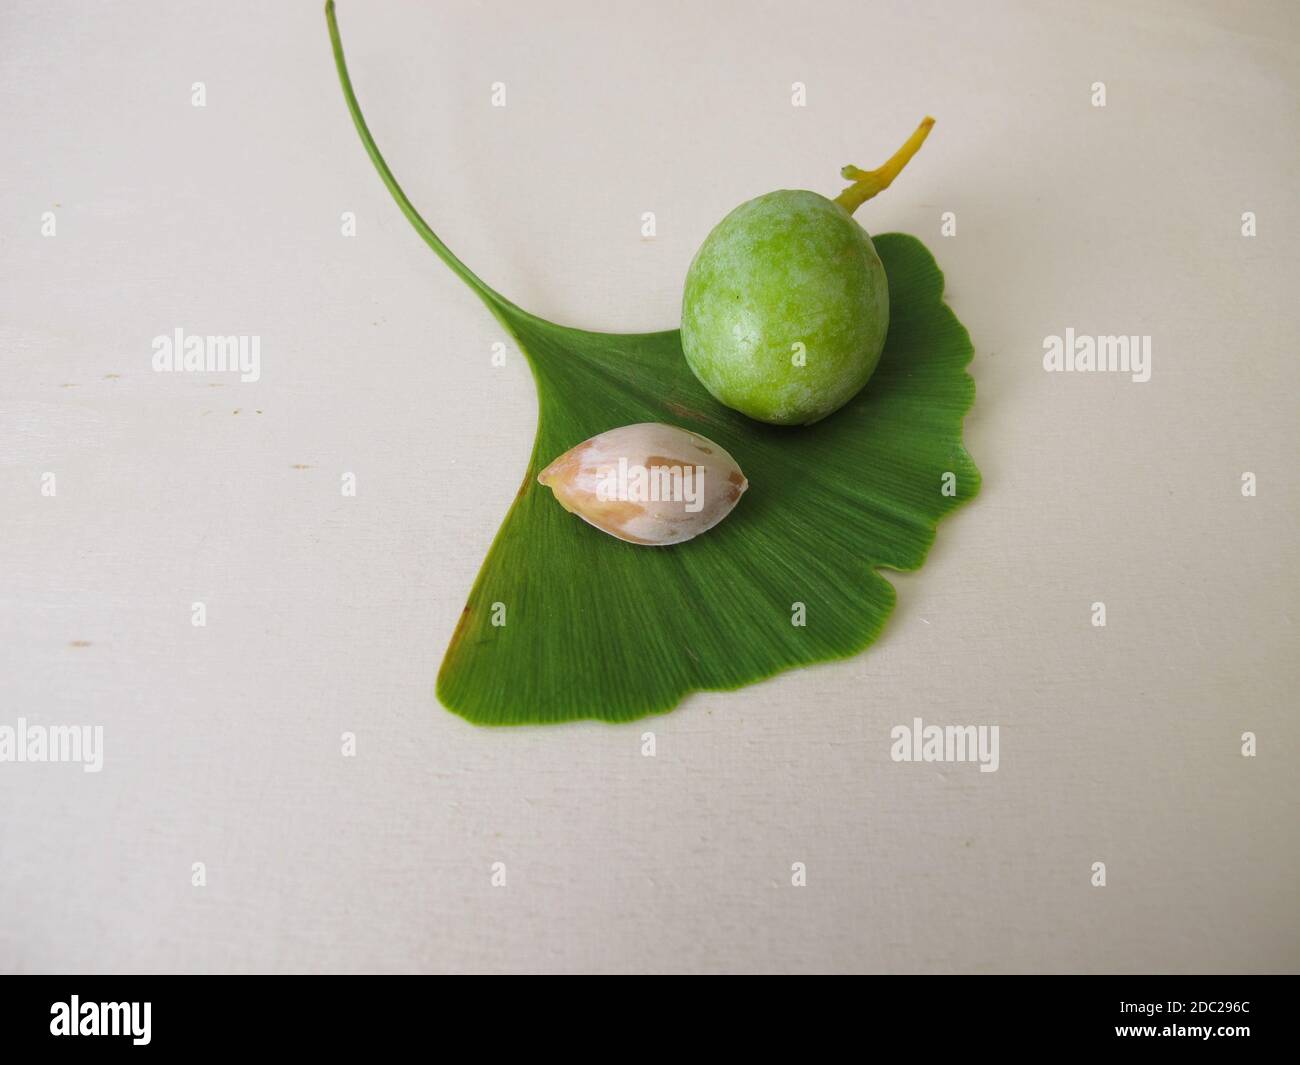 Ginkgo seeds or nuts and a leaf from the tree, Ginkgo biloba Stock Photo